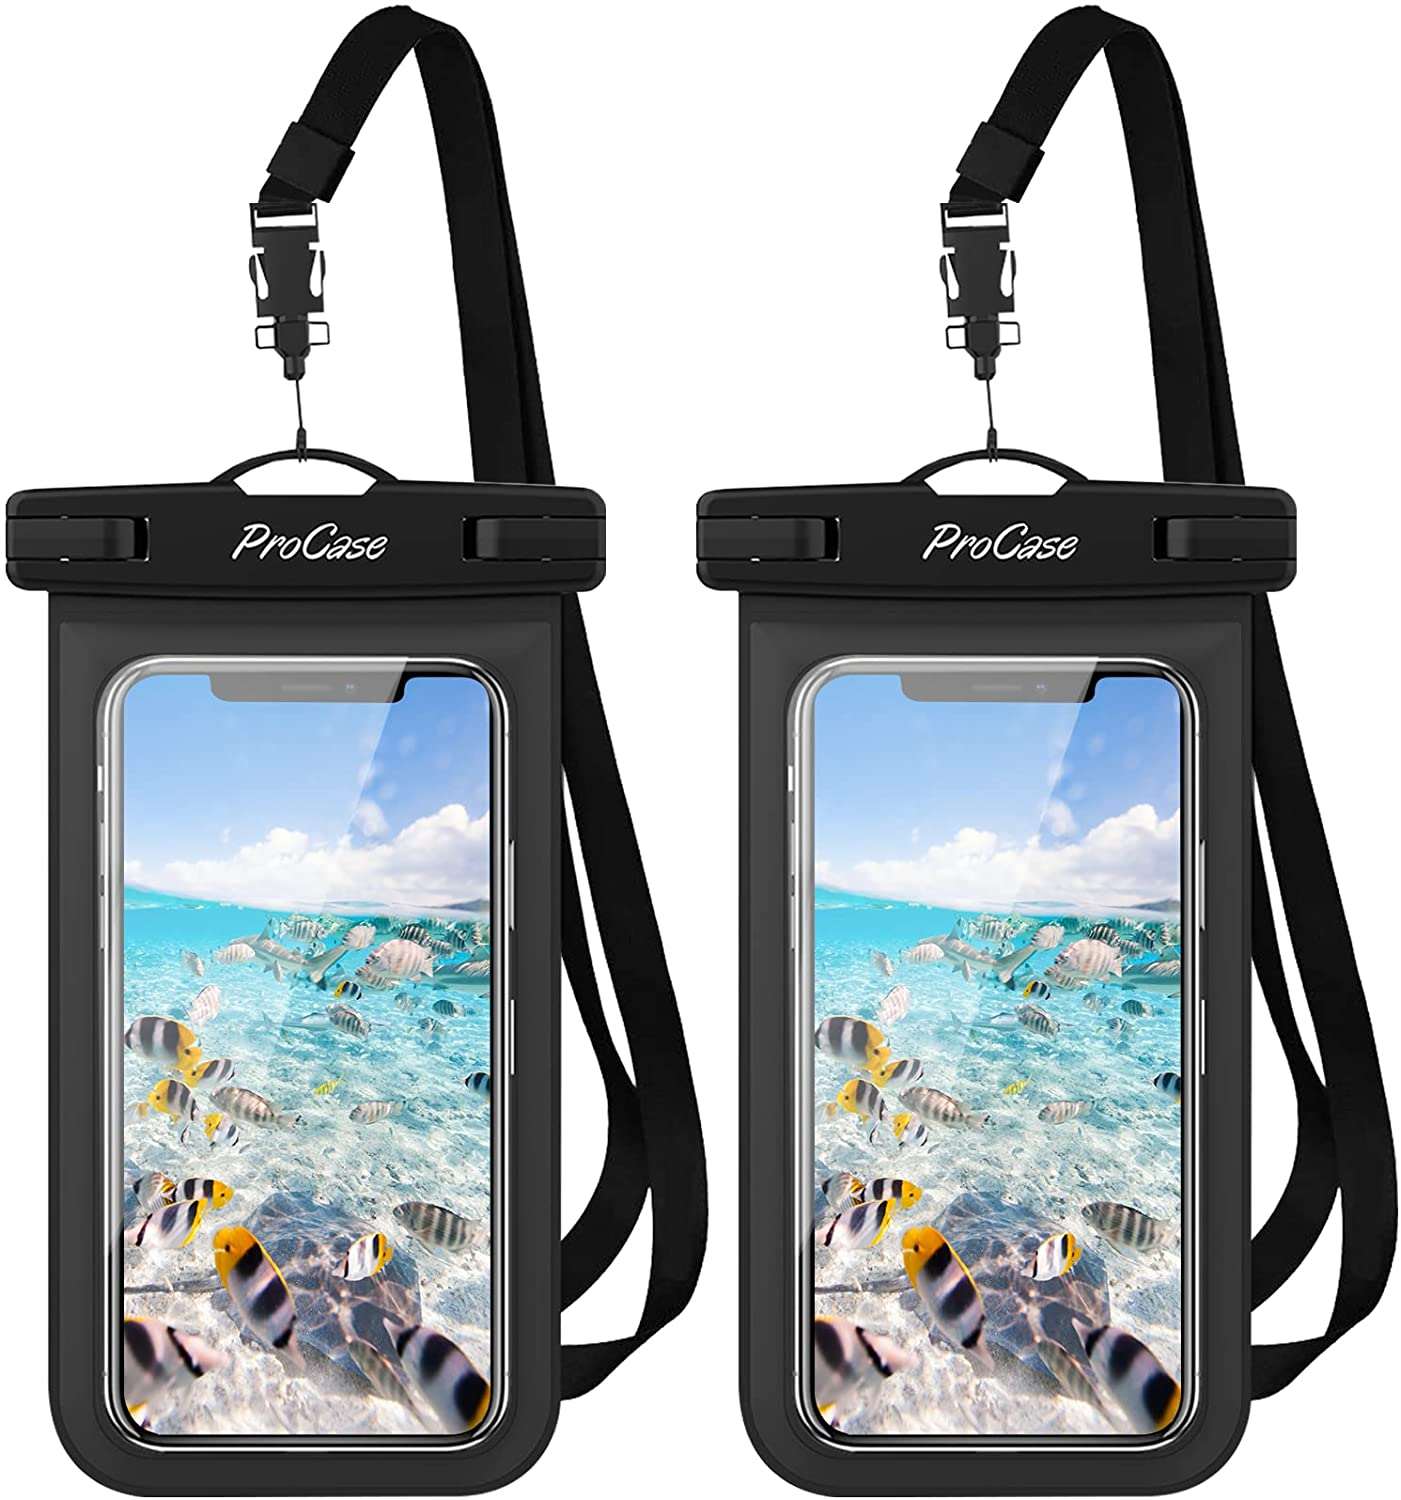 2 Pack) Universal Waterproof Cellphone Pouch